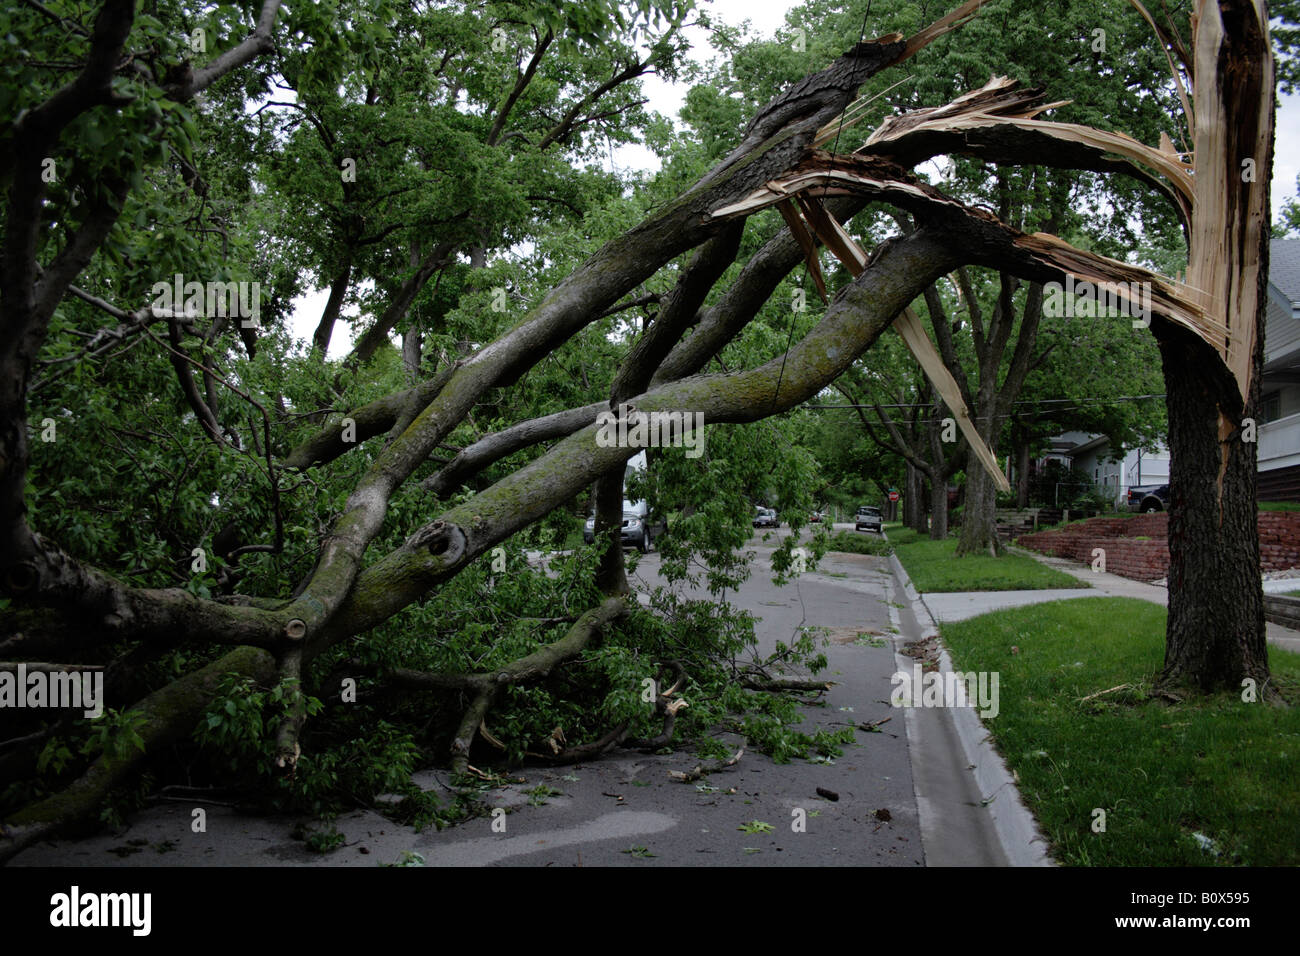 A fallen tree split down the trunk, electric wire trapped under the branches, blocking a residential street. Stock Photo